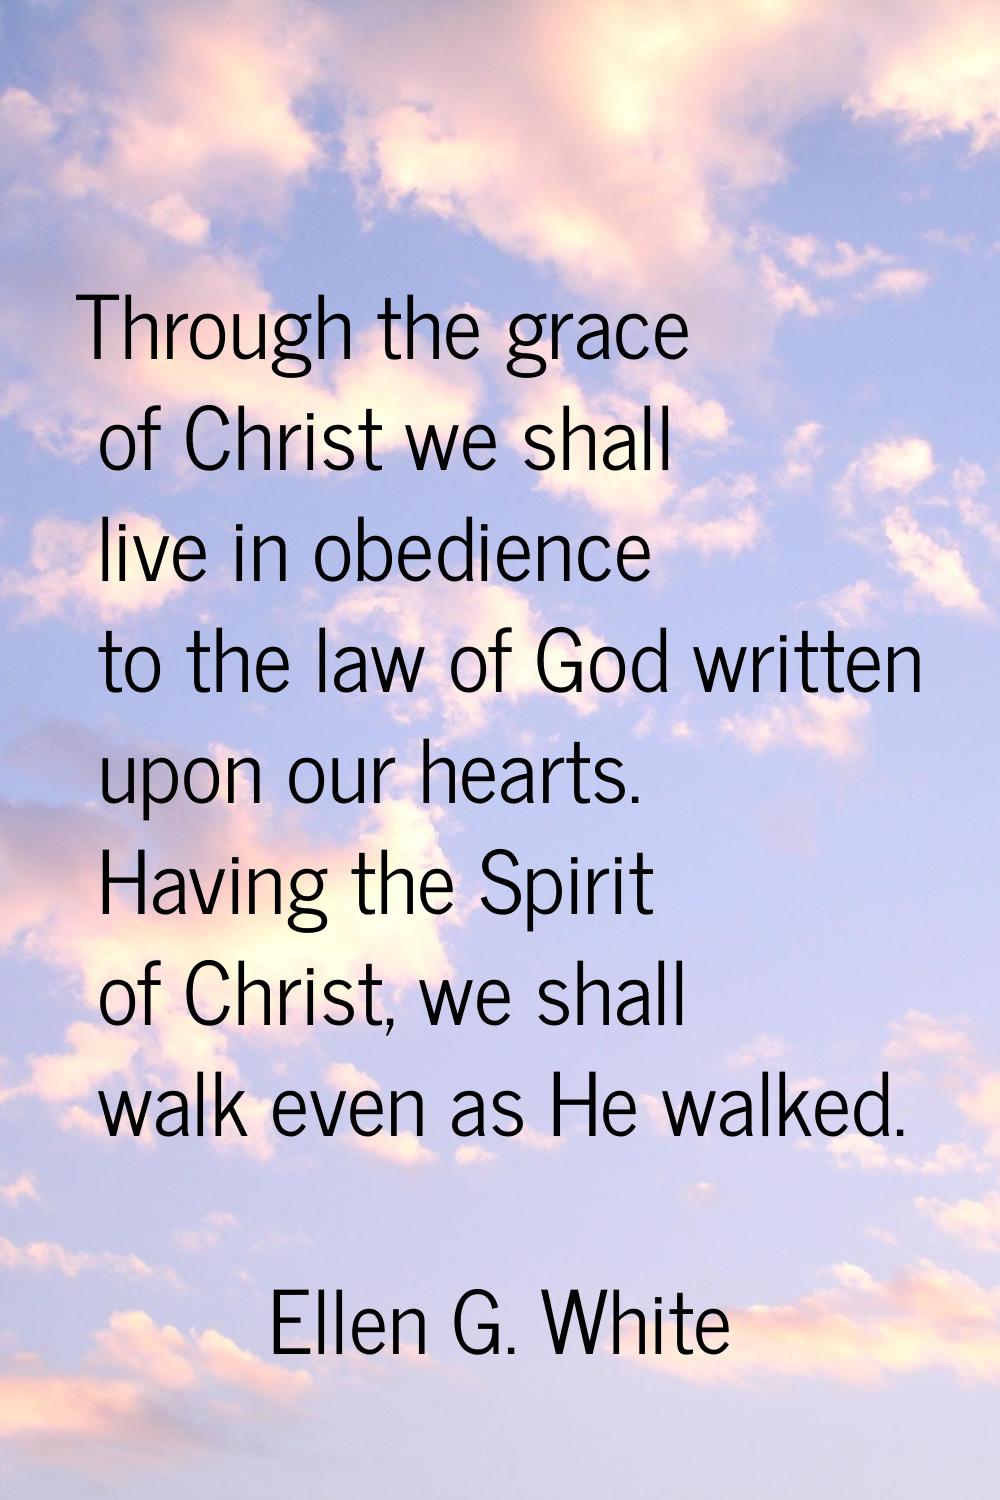 Through the grace of Christ we shall live in obedience to the law of God written upon our hearts. H